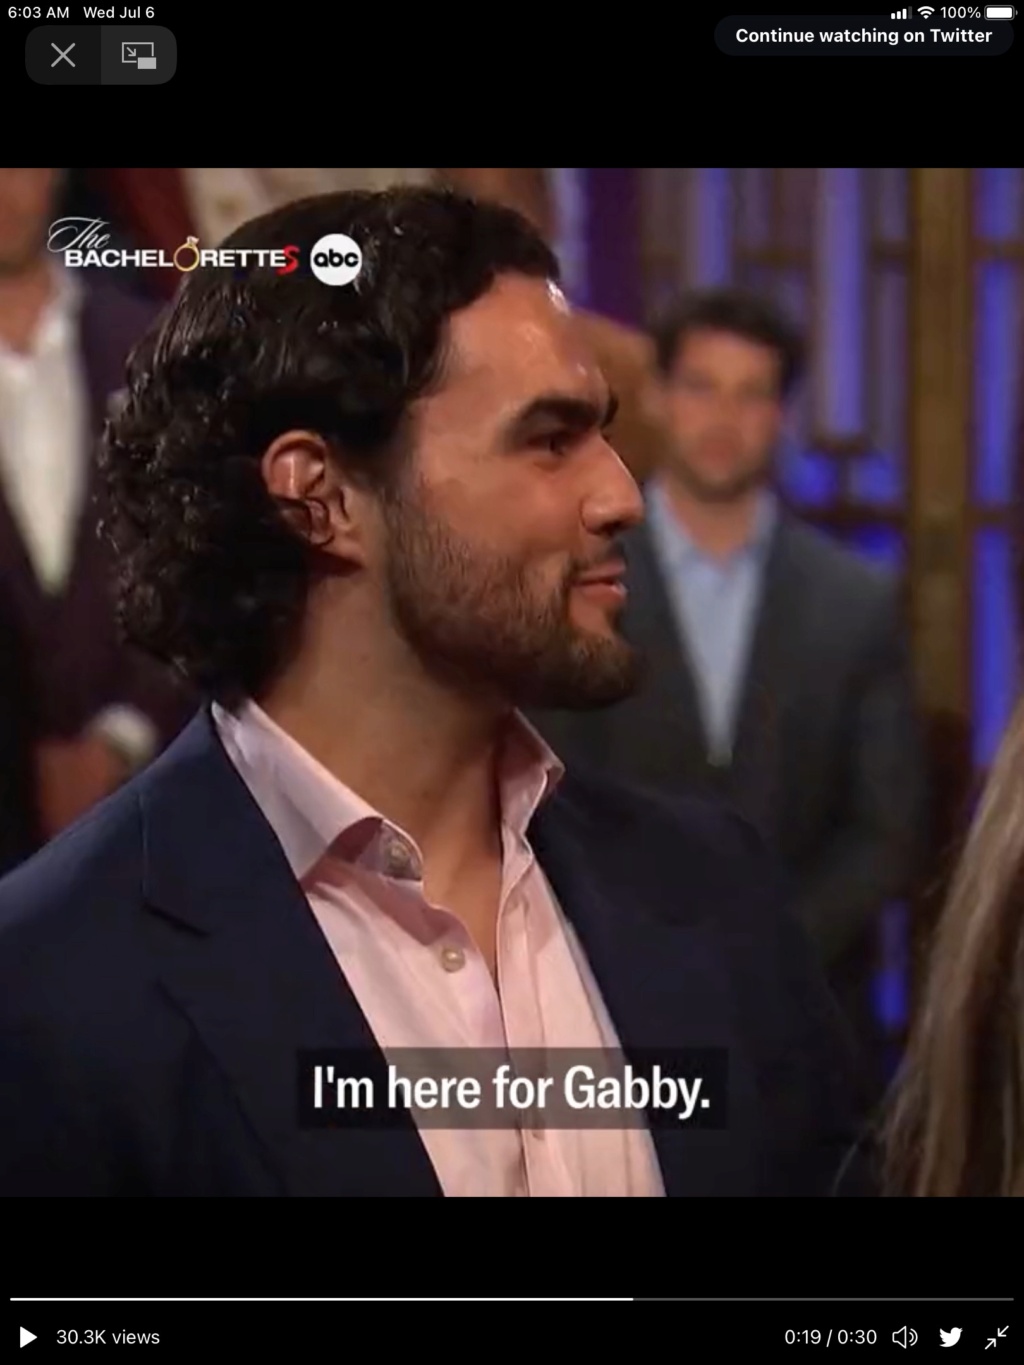 Bachelorette 19 - Gabby Windey - Rachel Recchia - SCaps - *Sleuthing Spoilers* - Page 2 61546b10